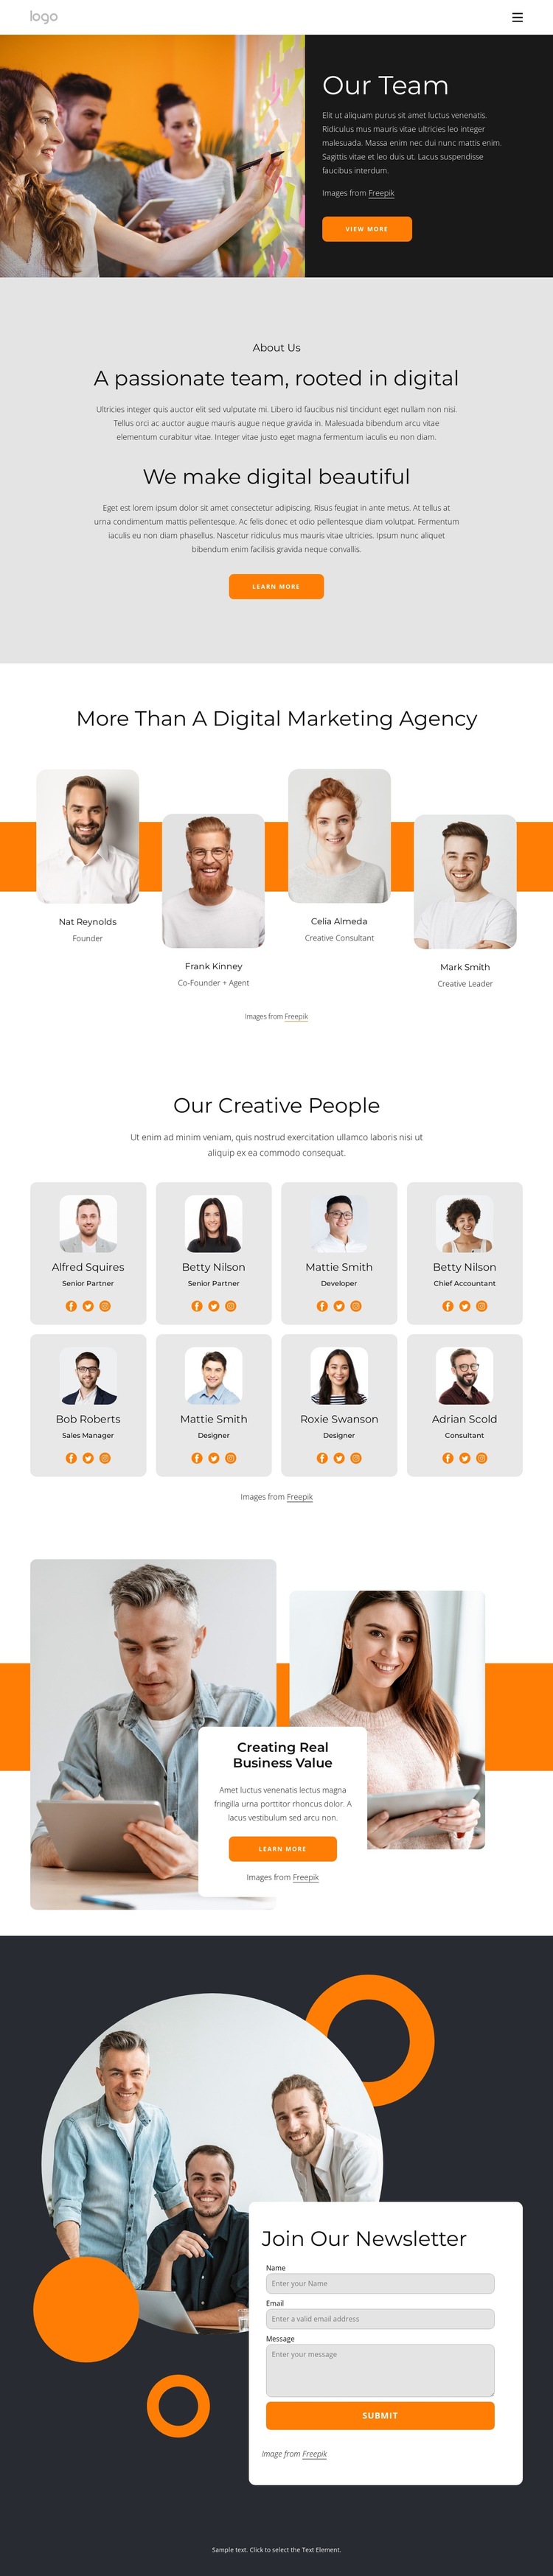 We are creative people with big dreams HTML5 Template